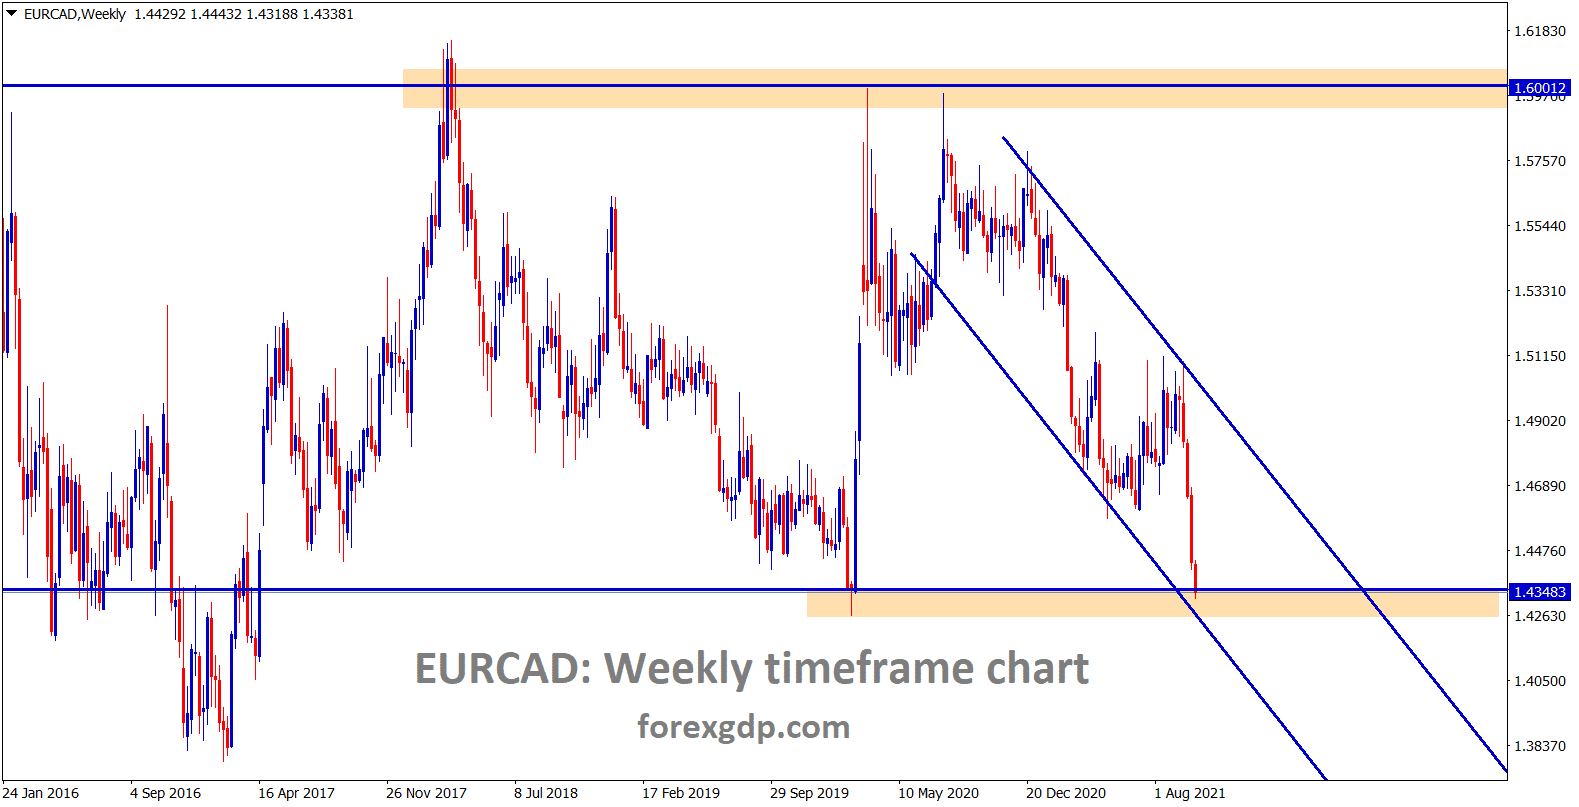 EURCAD has reached the major support area and the lower low level of the descending channel